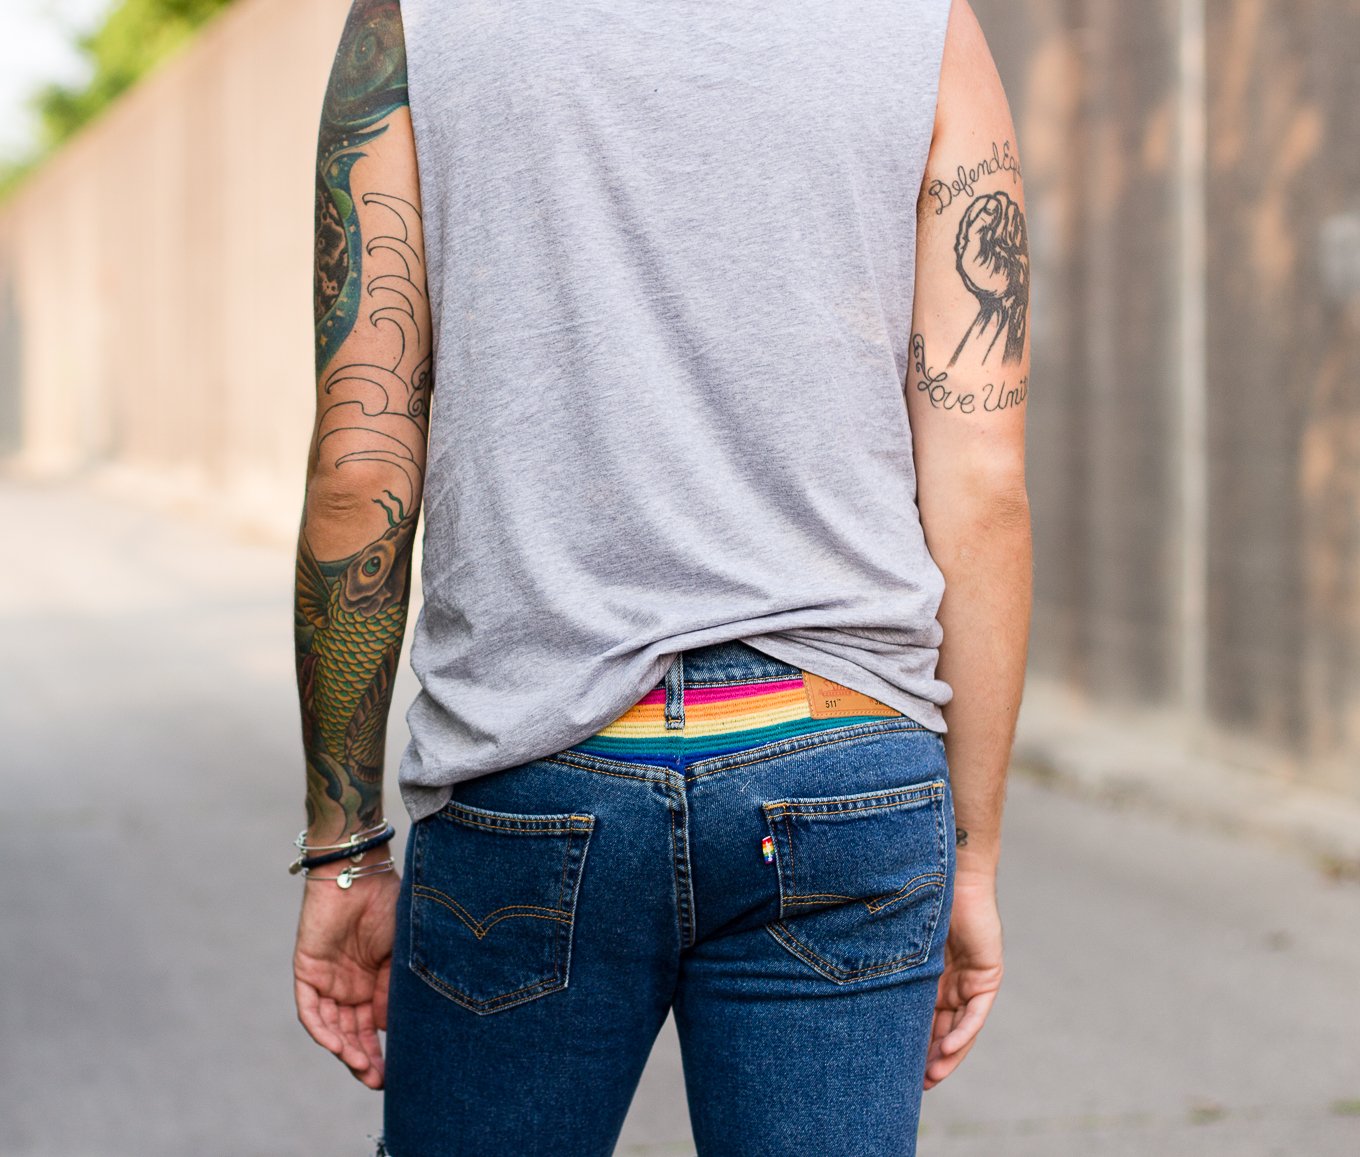 levis, pride 2015, stonewall, gay rights, live in levis